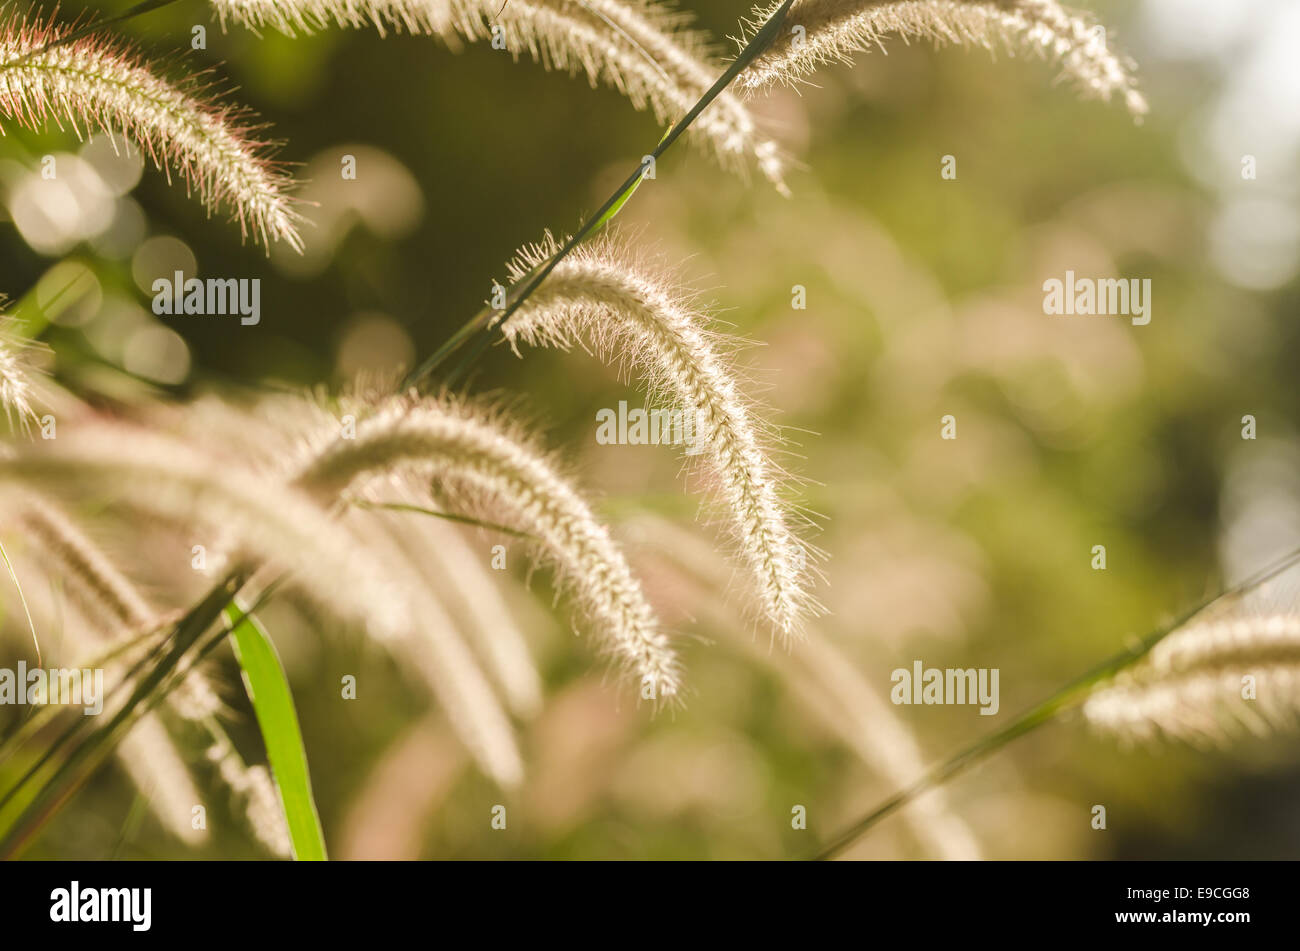 Dwarf Foxtail Grass or Pennisetum alopecuroides weed plants flowers Stock Photo